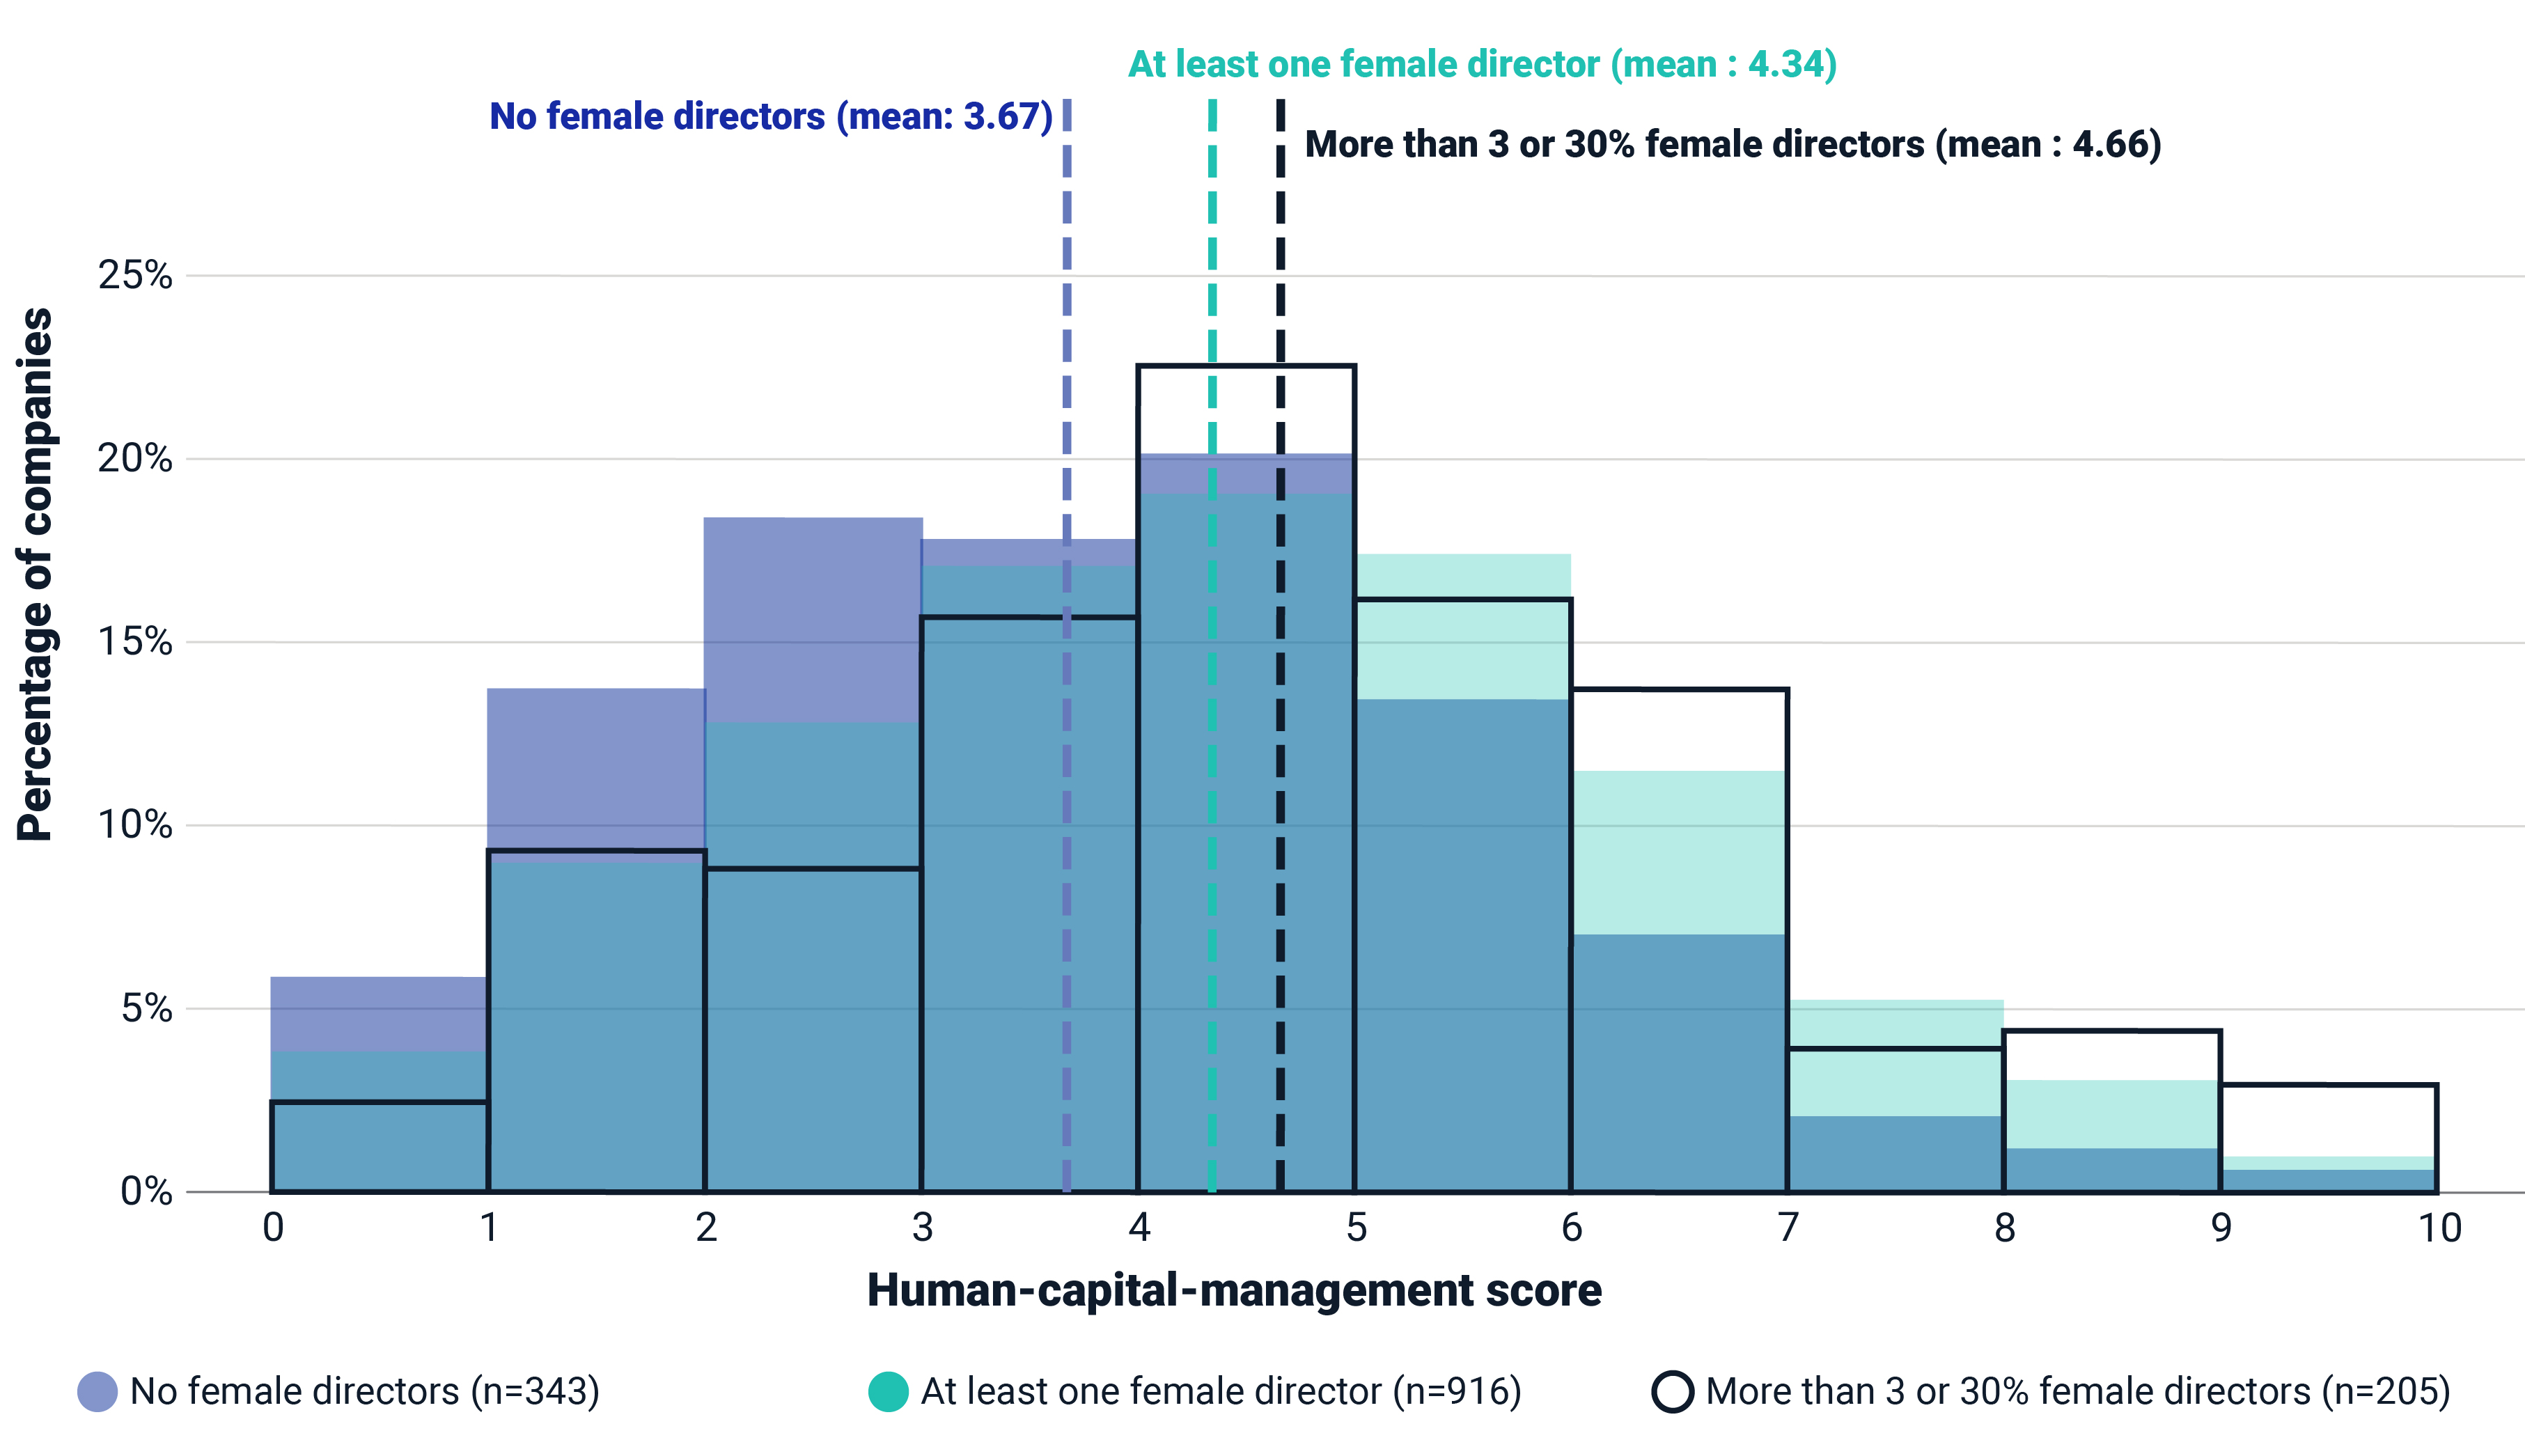 This chart shows the human-capital-management score at companies with female directors